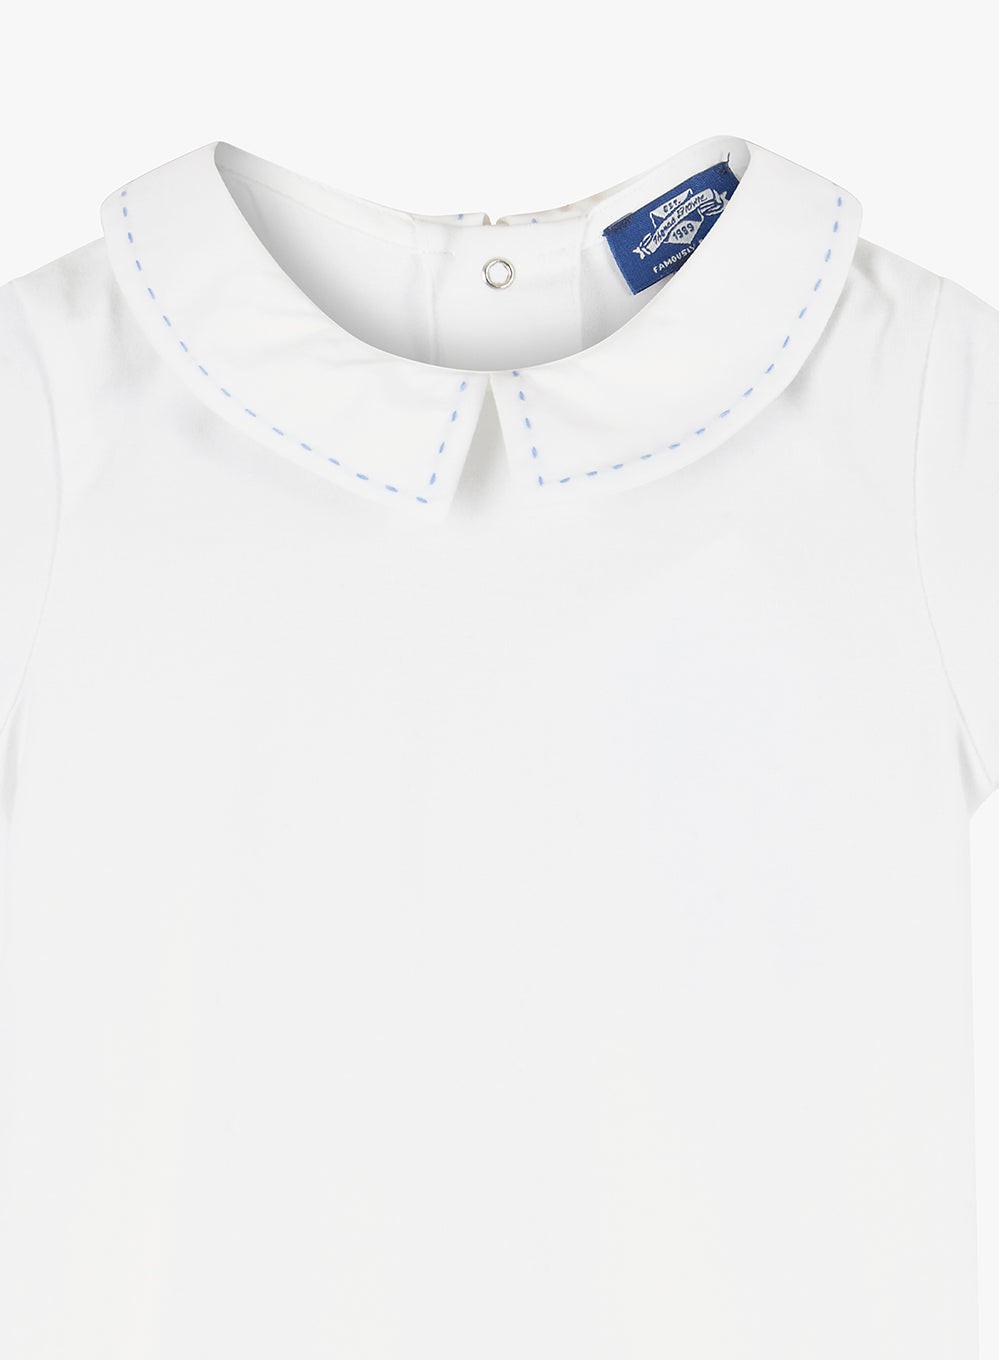 Thomas Brown Body Little Short-Sleeved Monty Stitch Body in White/Pale Blue